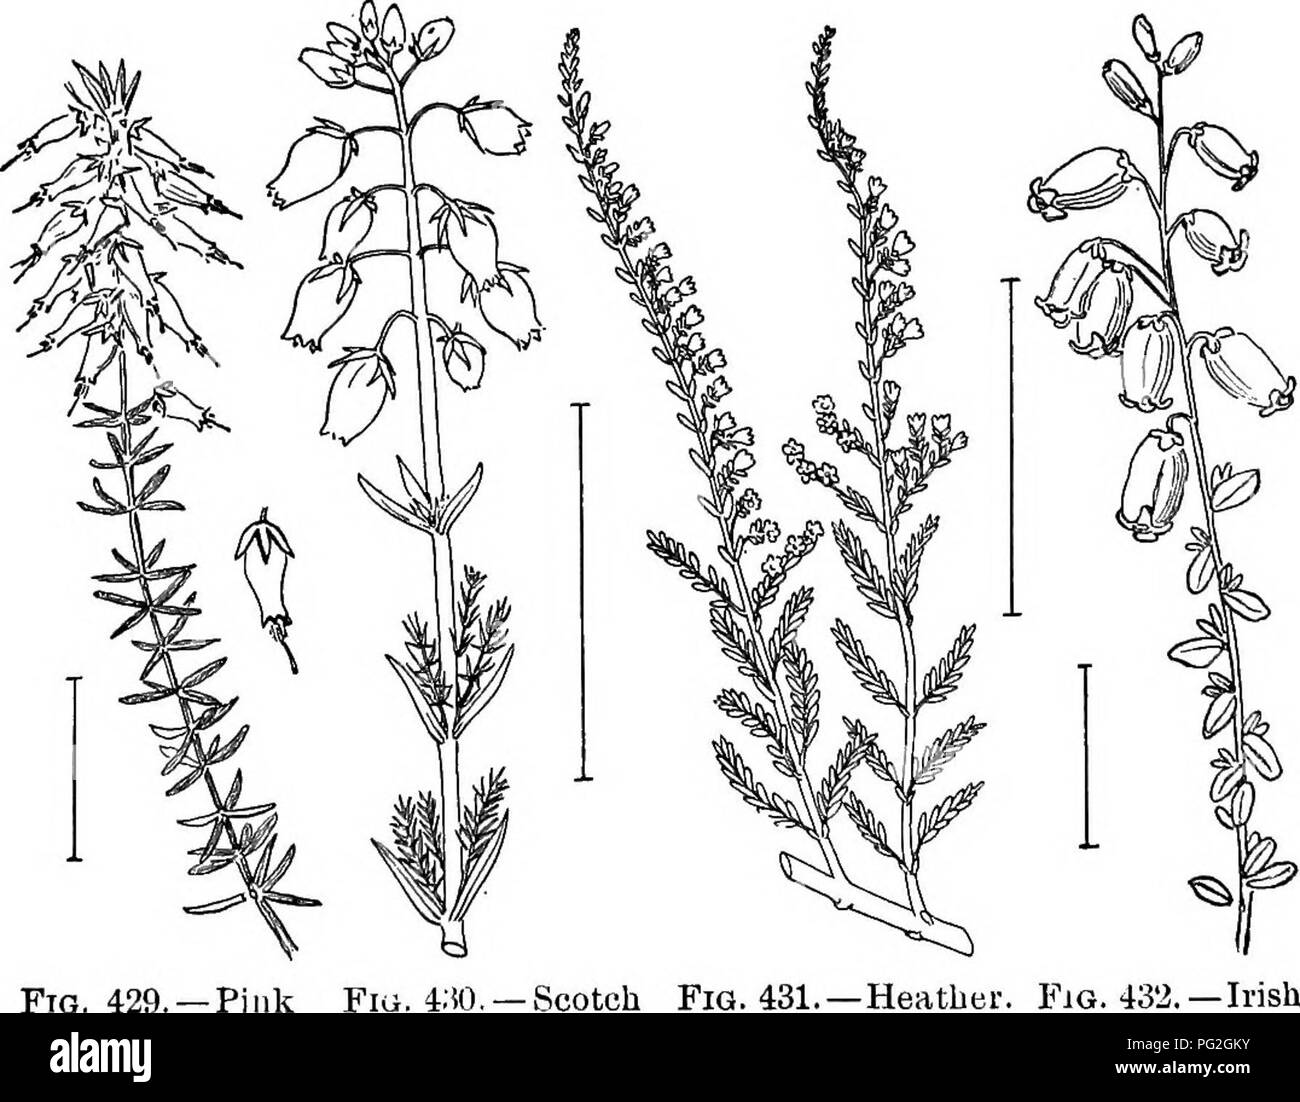 . Ornamental shrubs of the United States (hardy, cultivated). Shrubs. 254 DESCRIPTIONS OF THE SHRUBS I. Tree to 50 feet; blooming June, July. Flowering when small and shrub-like; leaves sour. Sourwood (427) or Sokkel- TREB — Oxyd^ndrum arb6reum. H. Flowers larger, J inch long, in side-umbels, white or faintly pink, May-July. A beautiful shrub, 1-4 feet. Staggek-bdsh (428) — Ly6nia mari^na (Pieris mari^na). Erica. The Heaths and Heather are all small-leaved, shrubby plants with usually small 4-lobed, bell- or urn-shaped flowers. The leaves are scale- or linear-shaped and arranged on the stems i Stock Photo